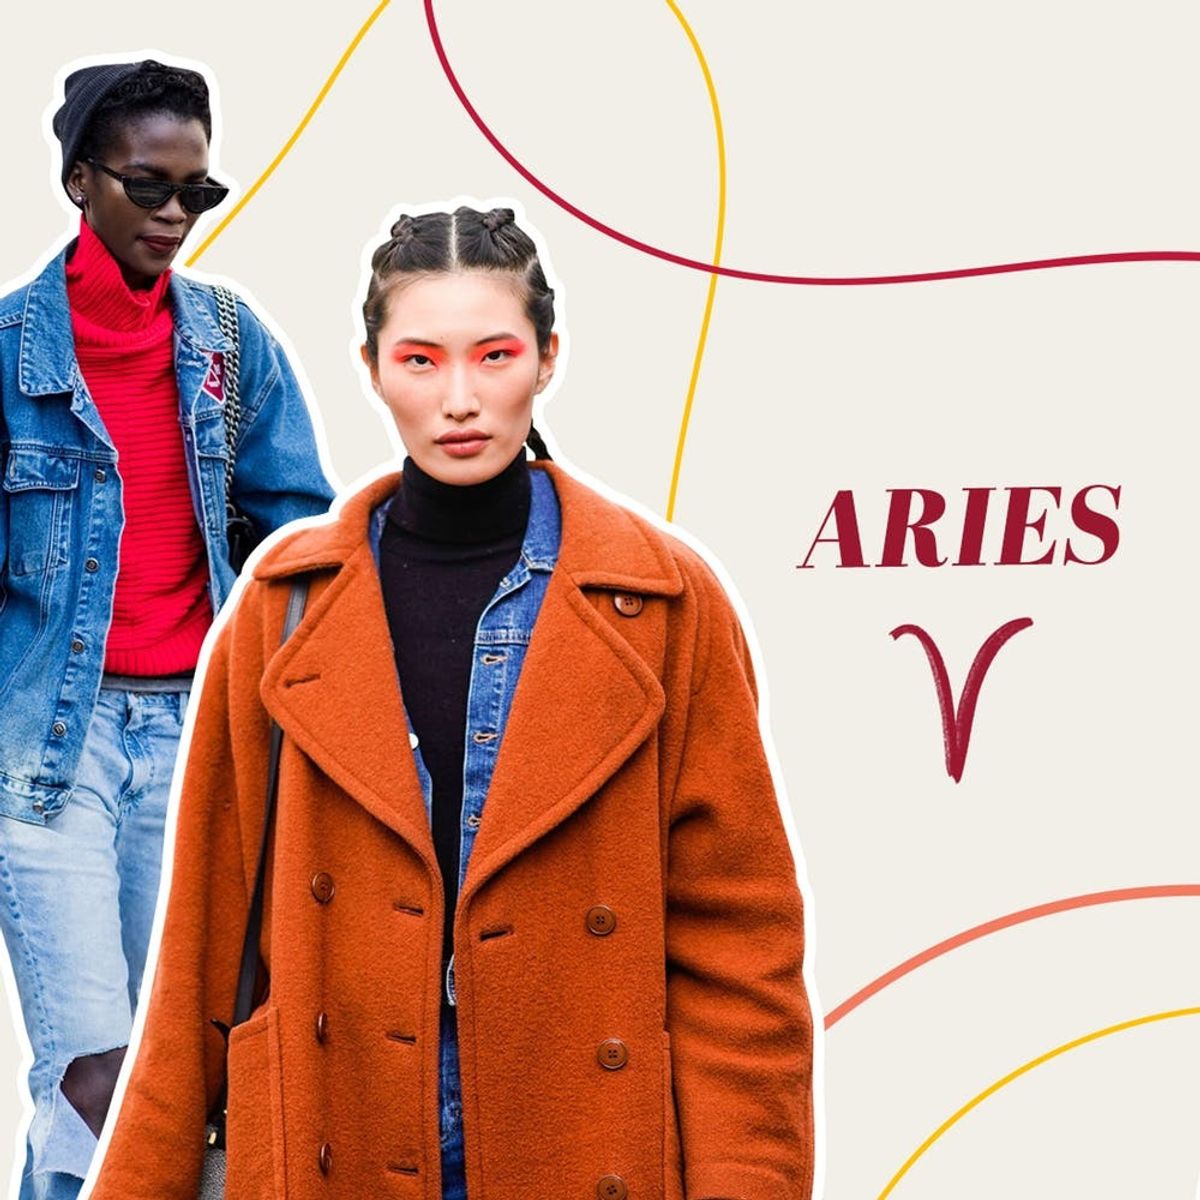 Best 2018 Fashion Trends to Try If You’re an Aries